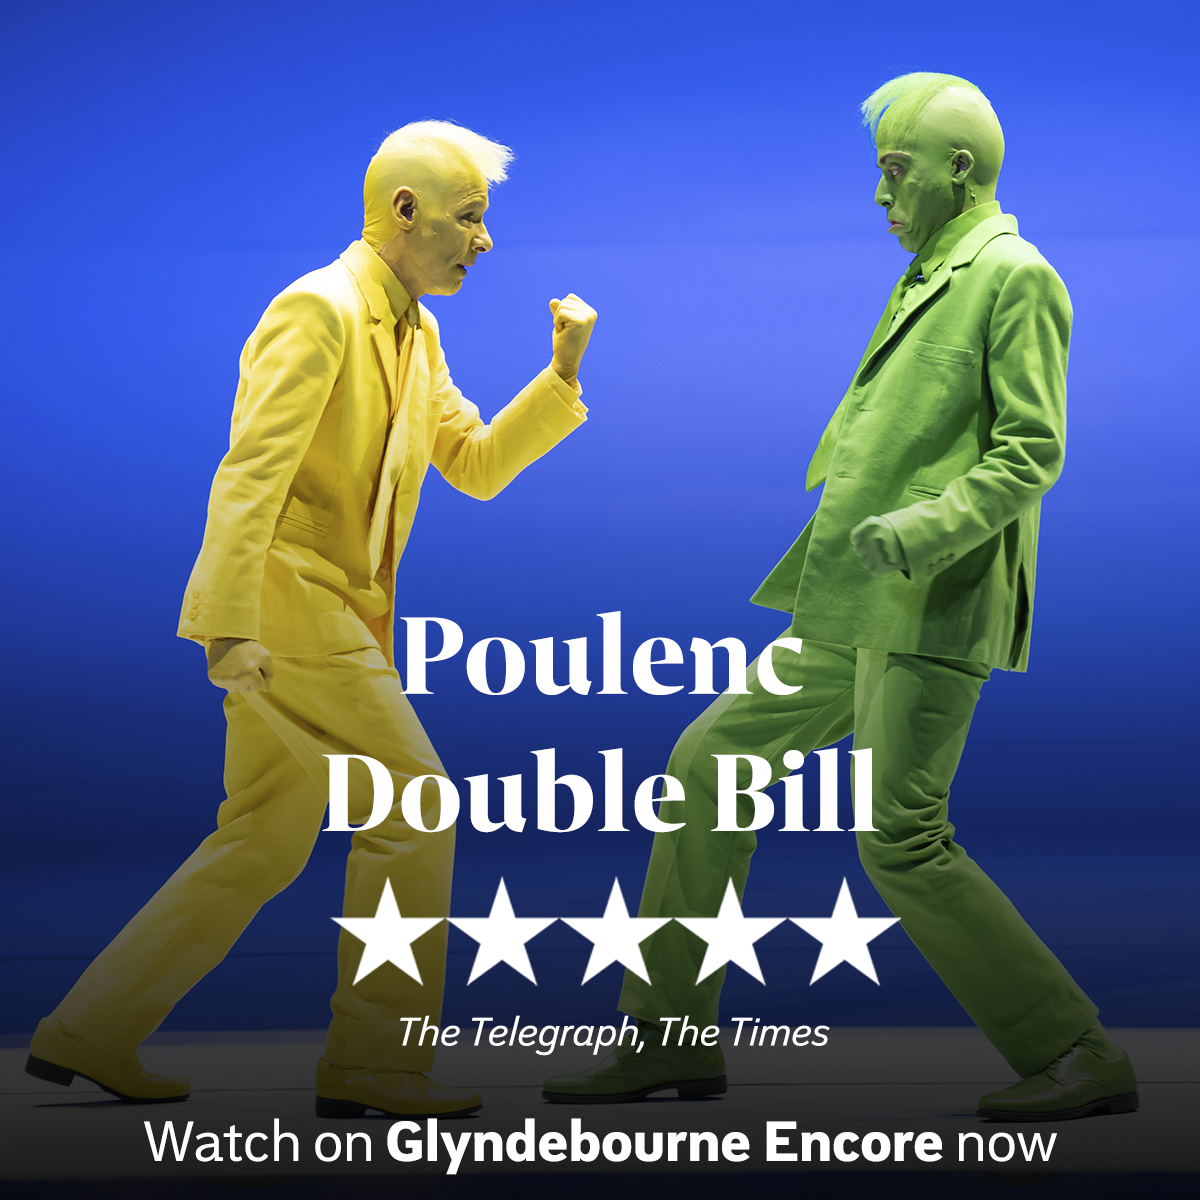 Our new Poulenc Double Bill from Festival 2022 is #OperaoftheMonth for October! Watch La Voix humaine and Les Mamelles de Tirésias on Glyndebourne Encore now! encore.glyndebourne.com/poulenc-double…